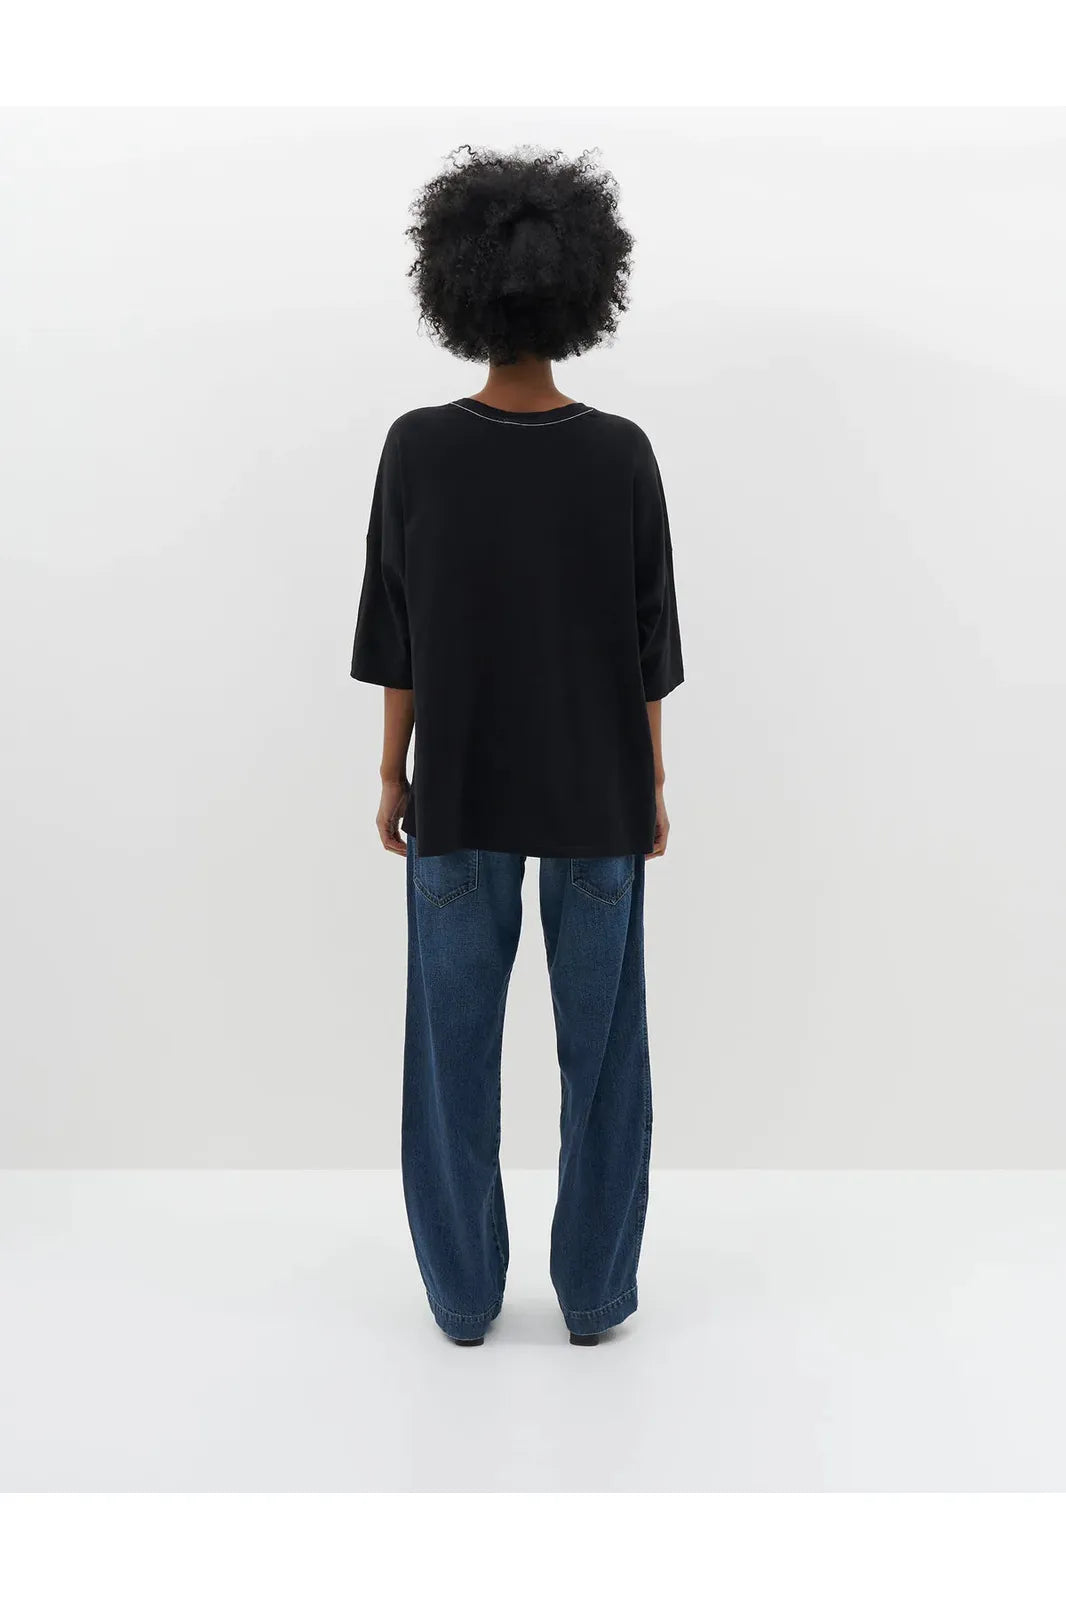 Slouch Side Step Short Sleeve T-shirt in Black by Bassike’s